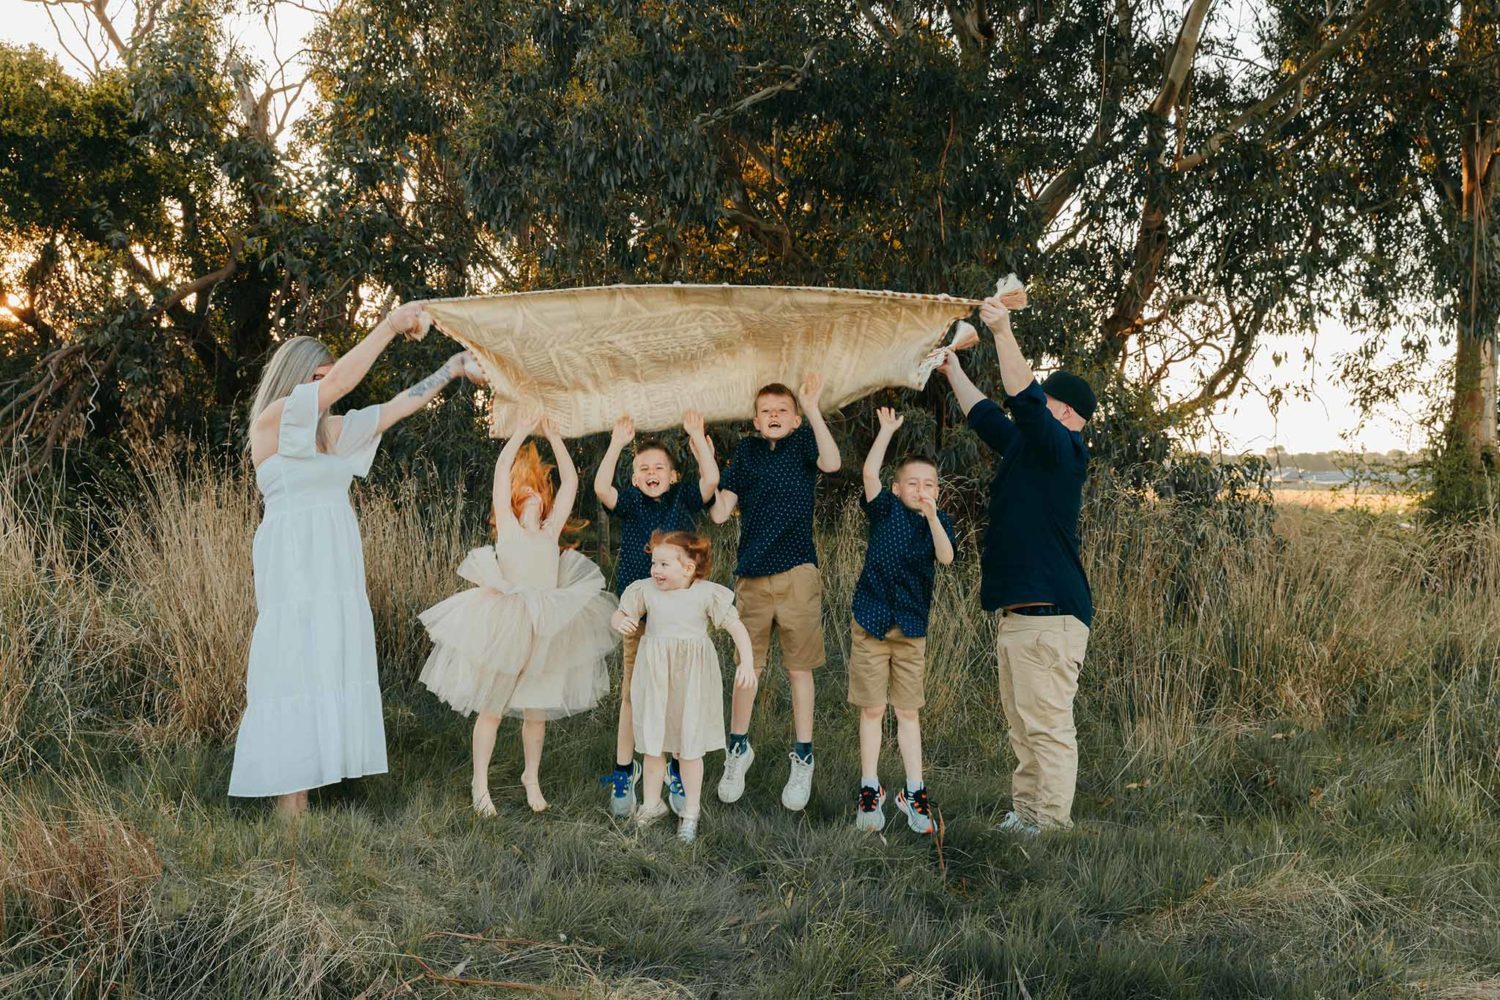 Photographing my best friend. Family. mum and dad holding a blanket in the air above children. Children jumping underneath it.